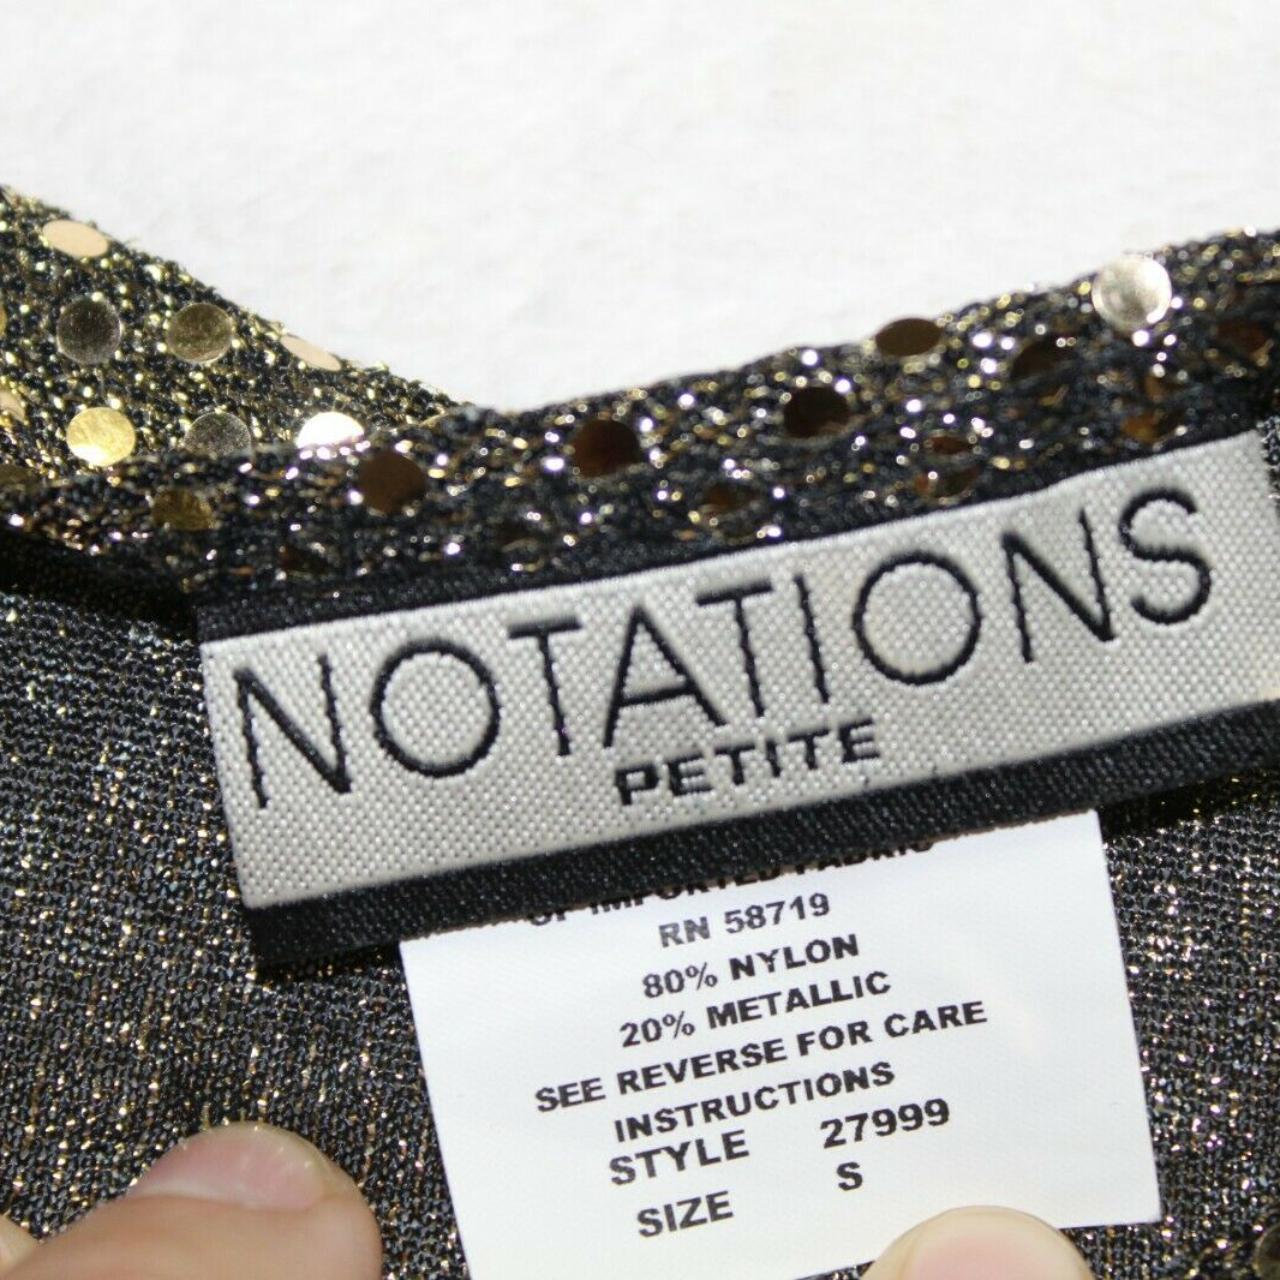 Product Image 2 - Notations womens top size S